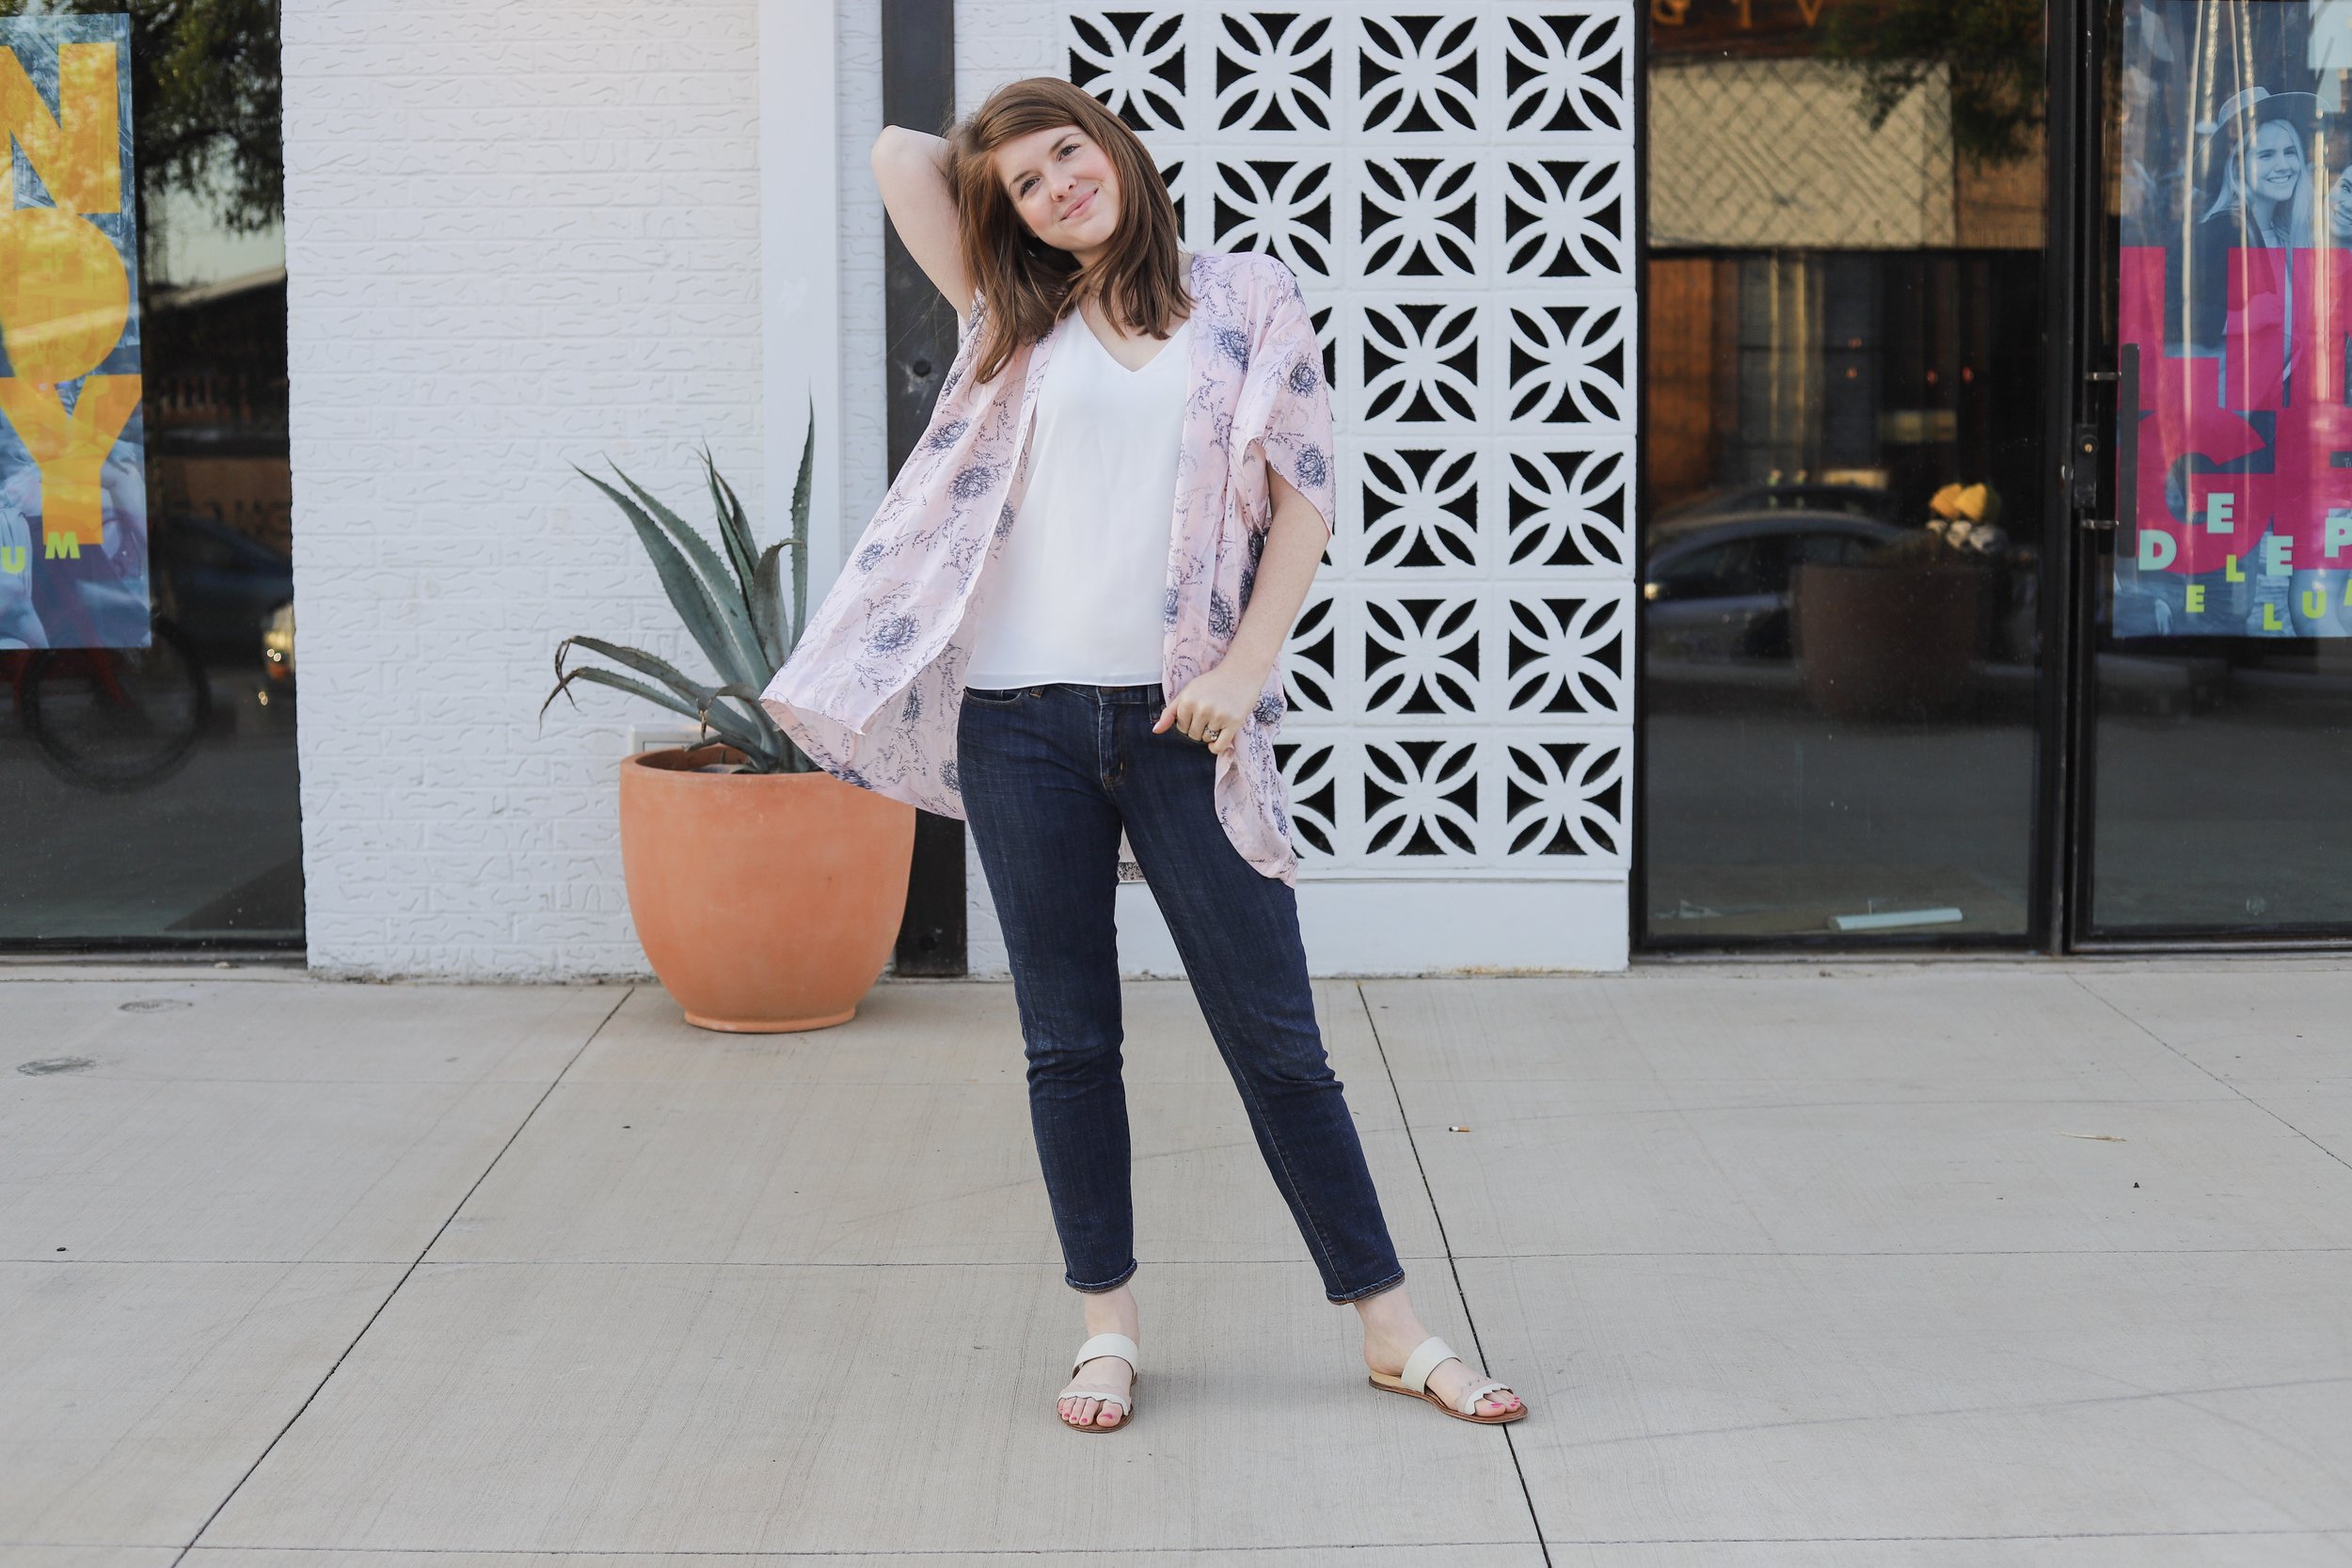 how to brighten white clothing without bleach, spring and summer whites, branch basics, lments of style, ellemulenos, nontoxic laundry detergent, loft pink vine kimono